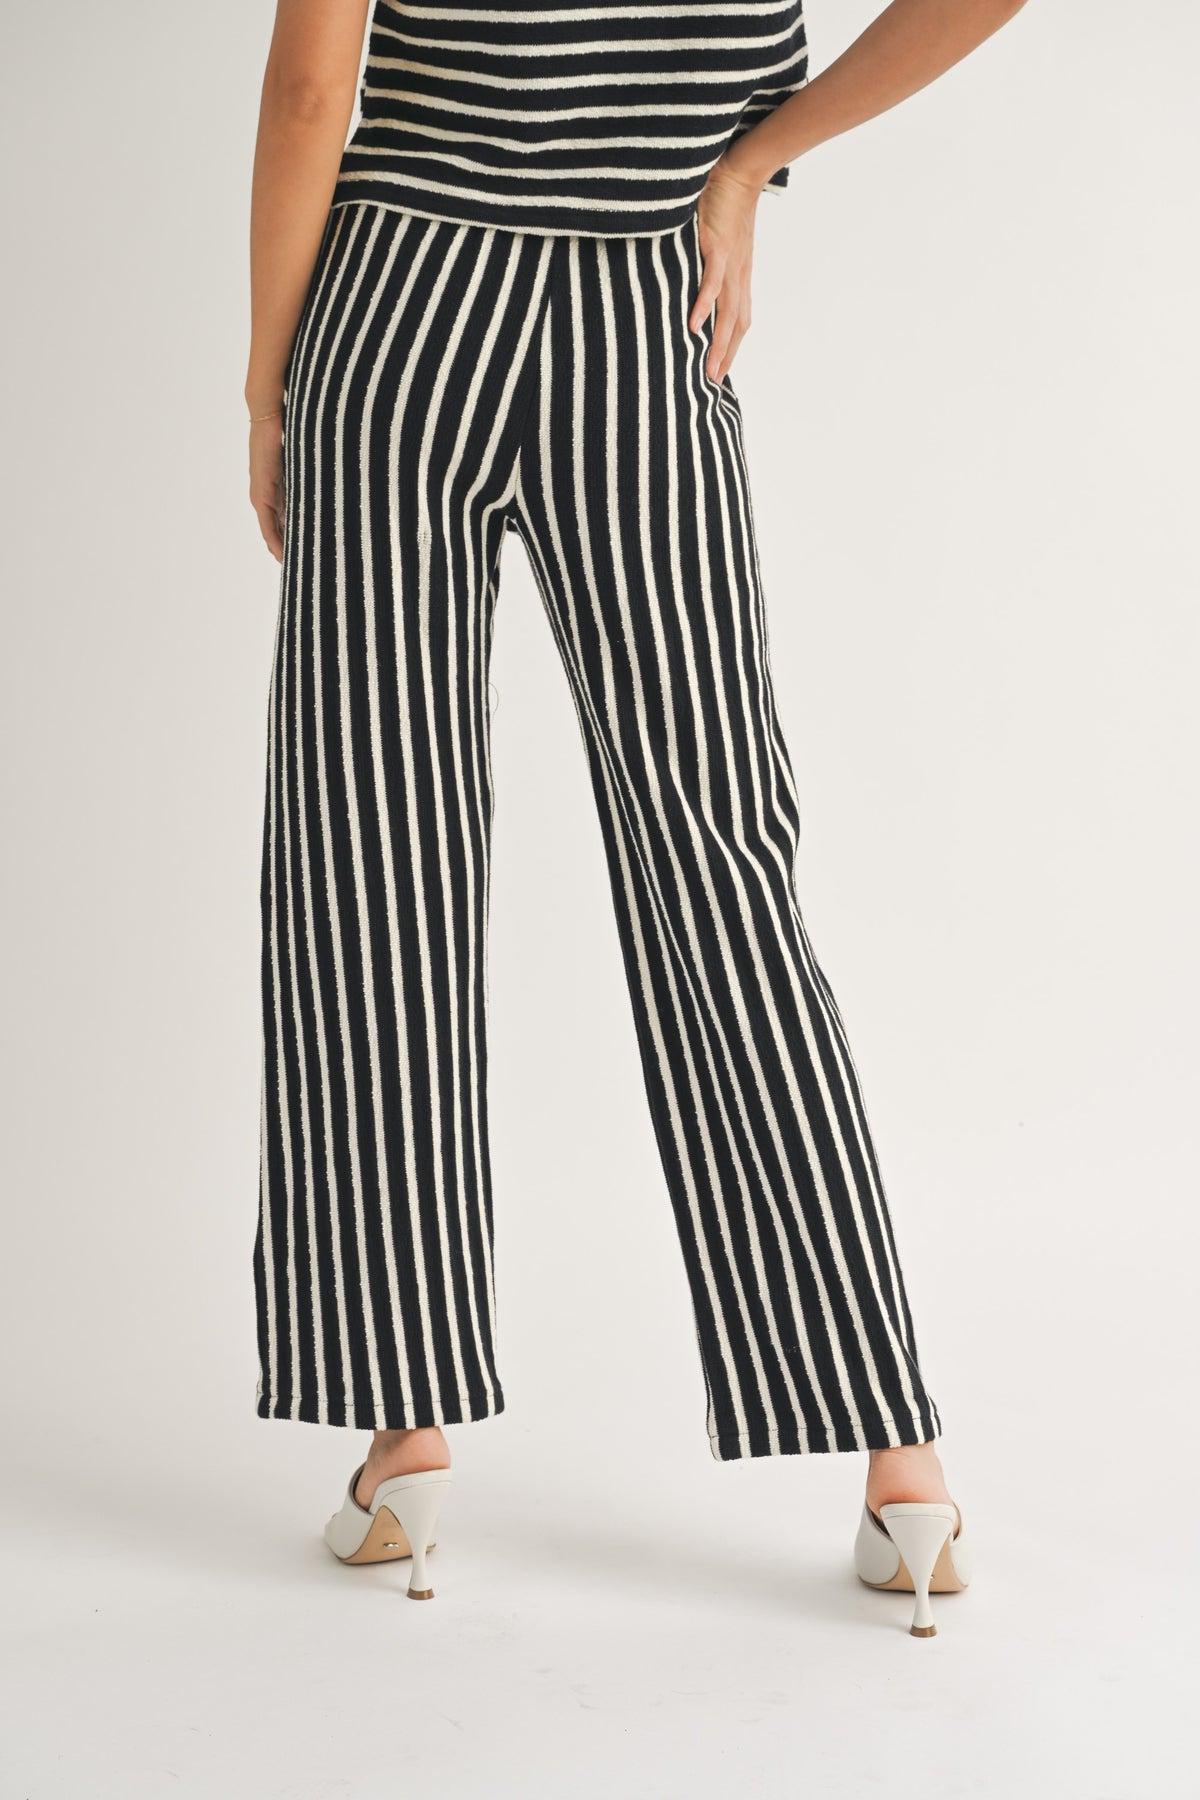 textured stripe knitted pants in black and white-back